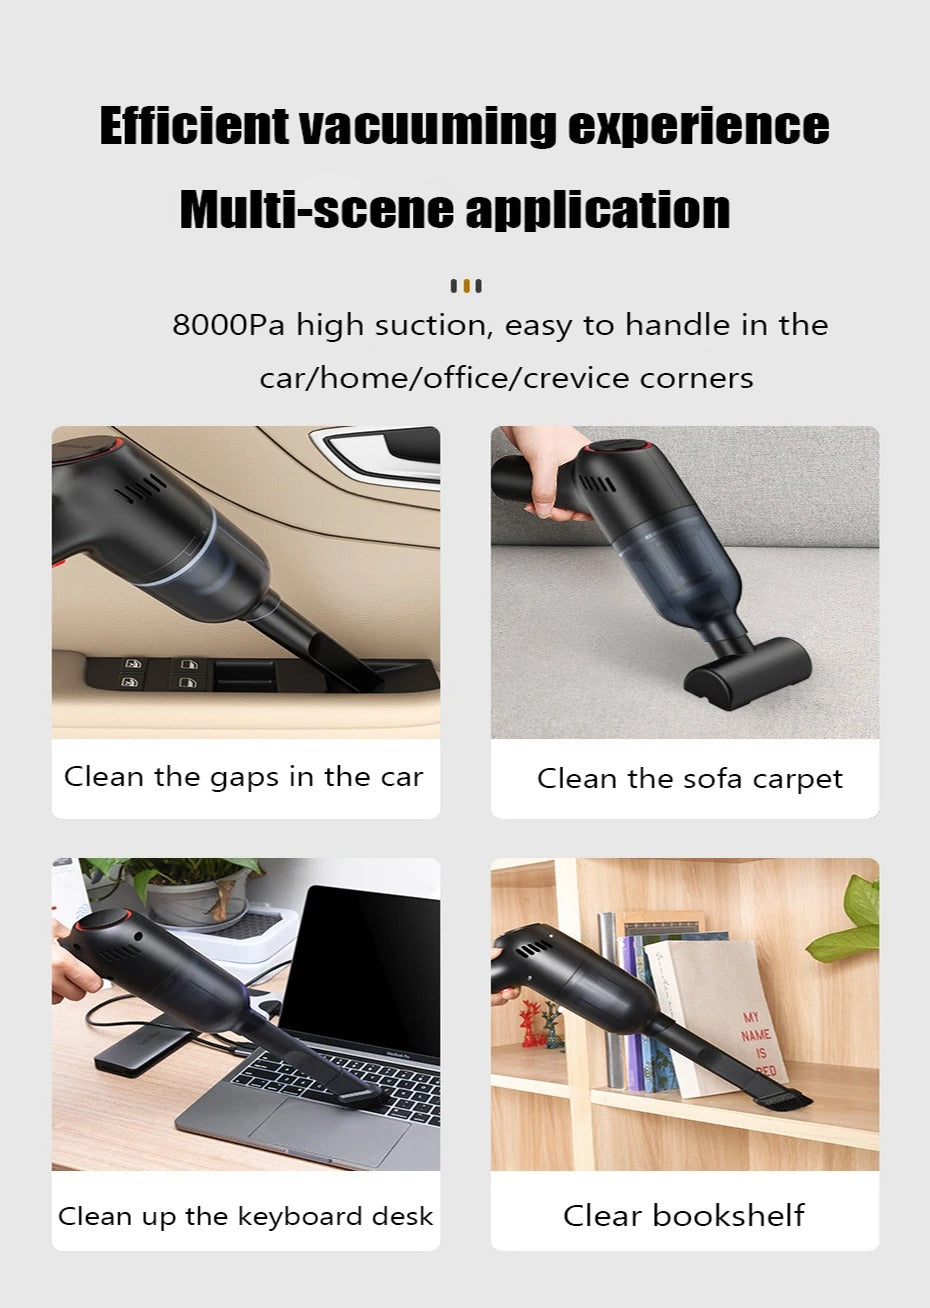 8000pa Wireless Mini Vacuum Cleaner Strong Suction Portable Low Noise